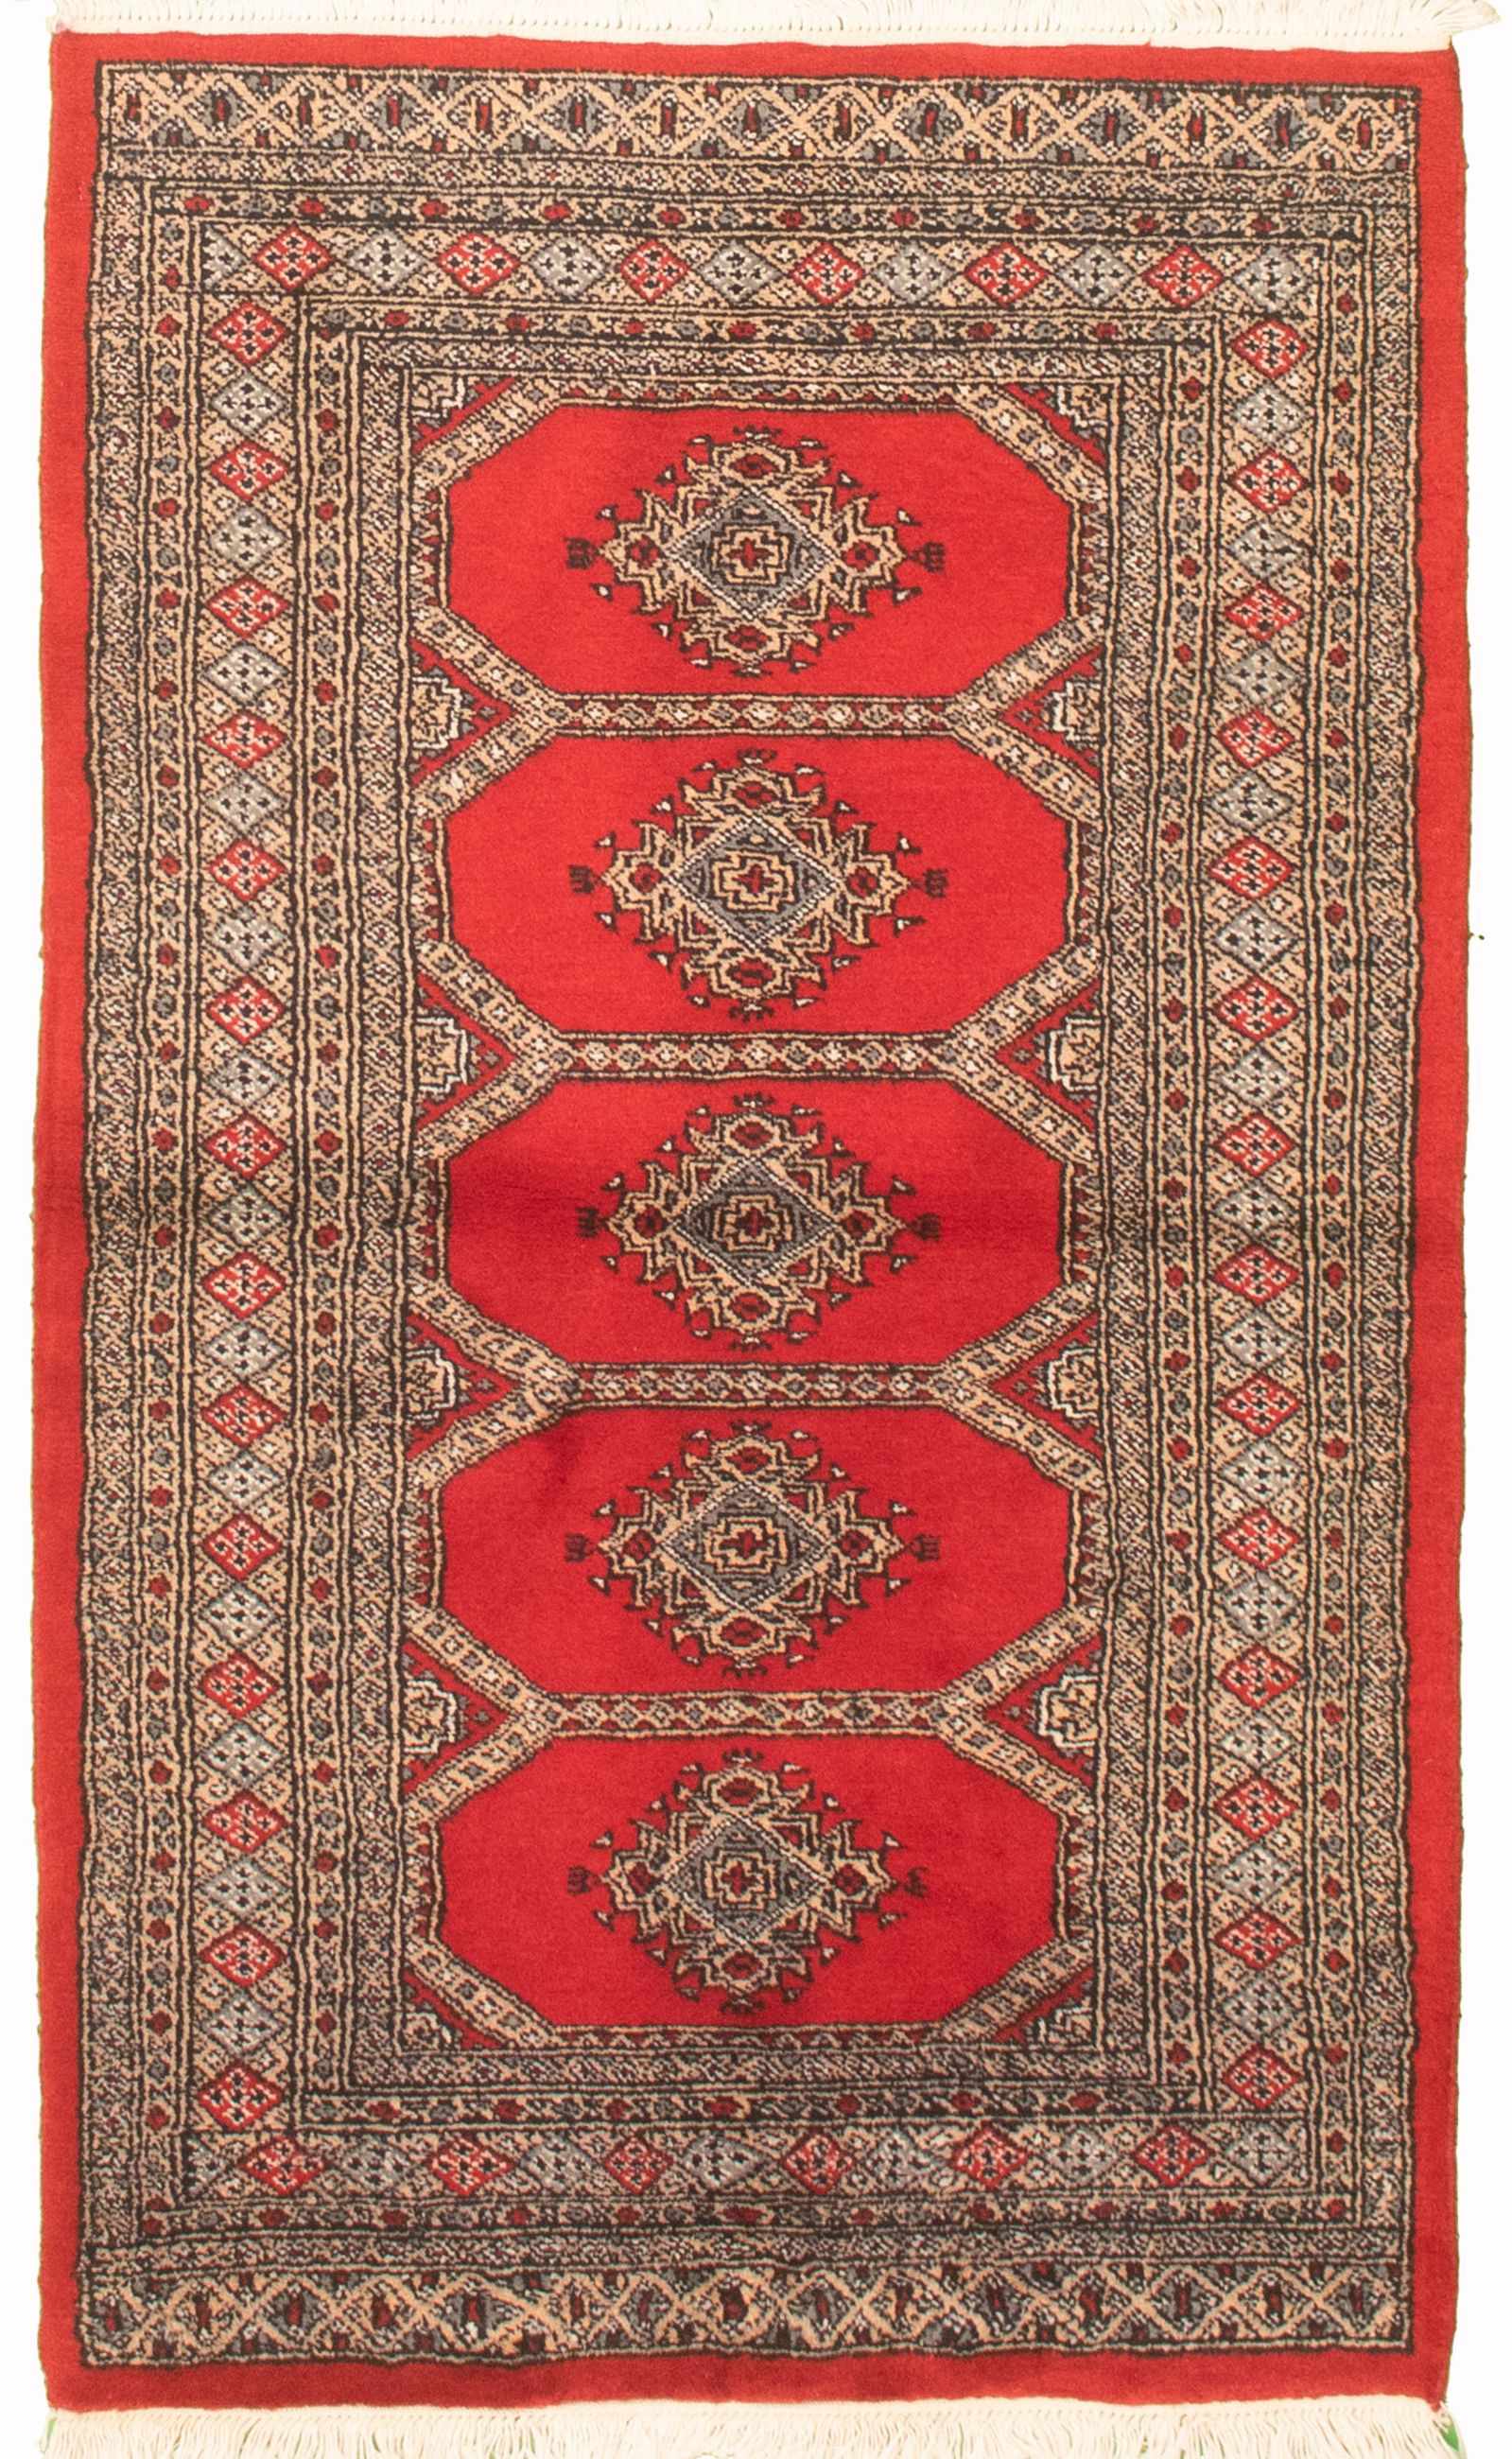 Hand-knotted Finest Peshawar Bokhara Red Wool Rug 2'11" x 5'2" Size: 2'11" x 5'2"  